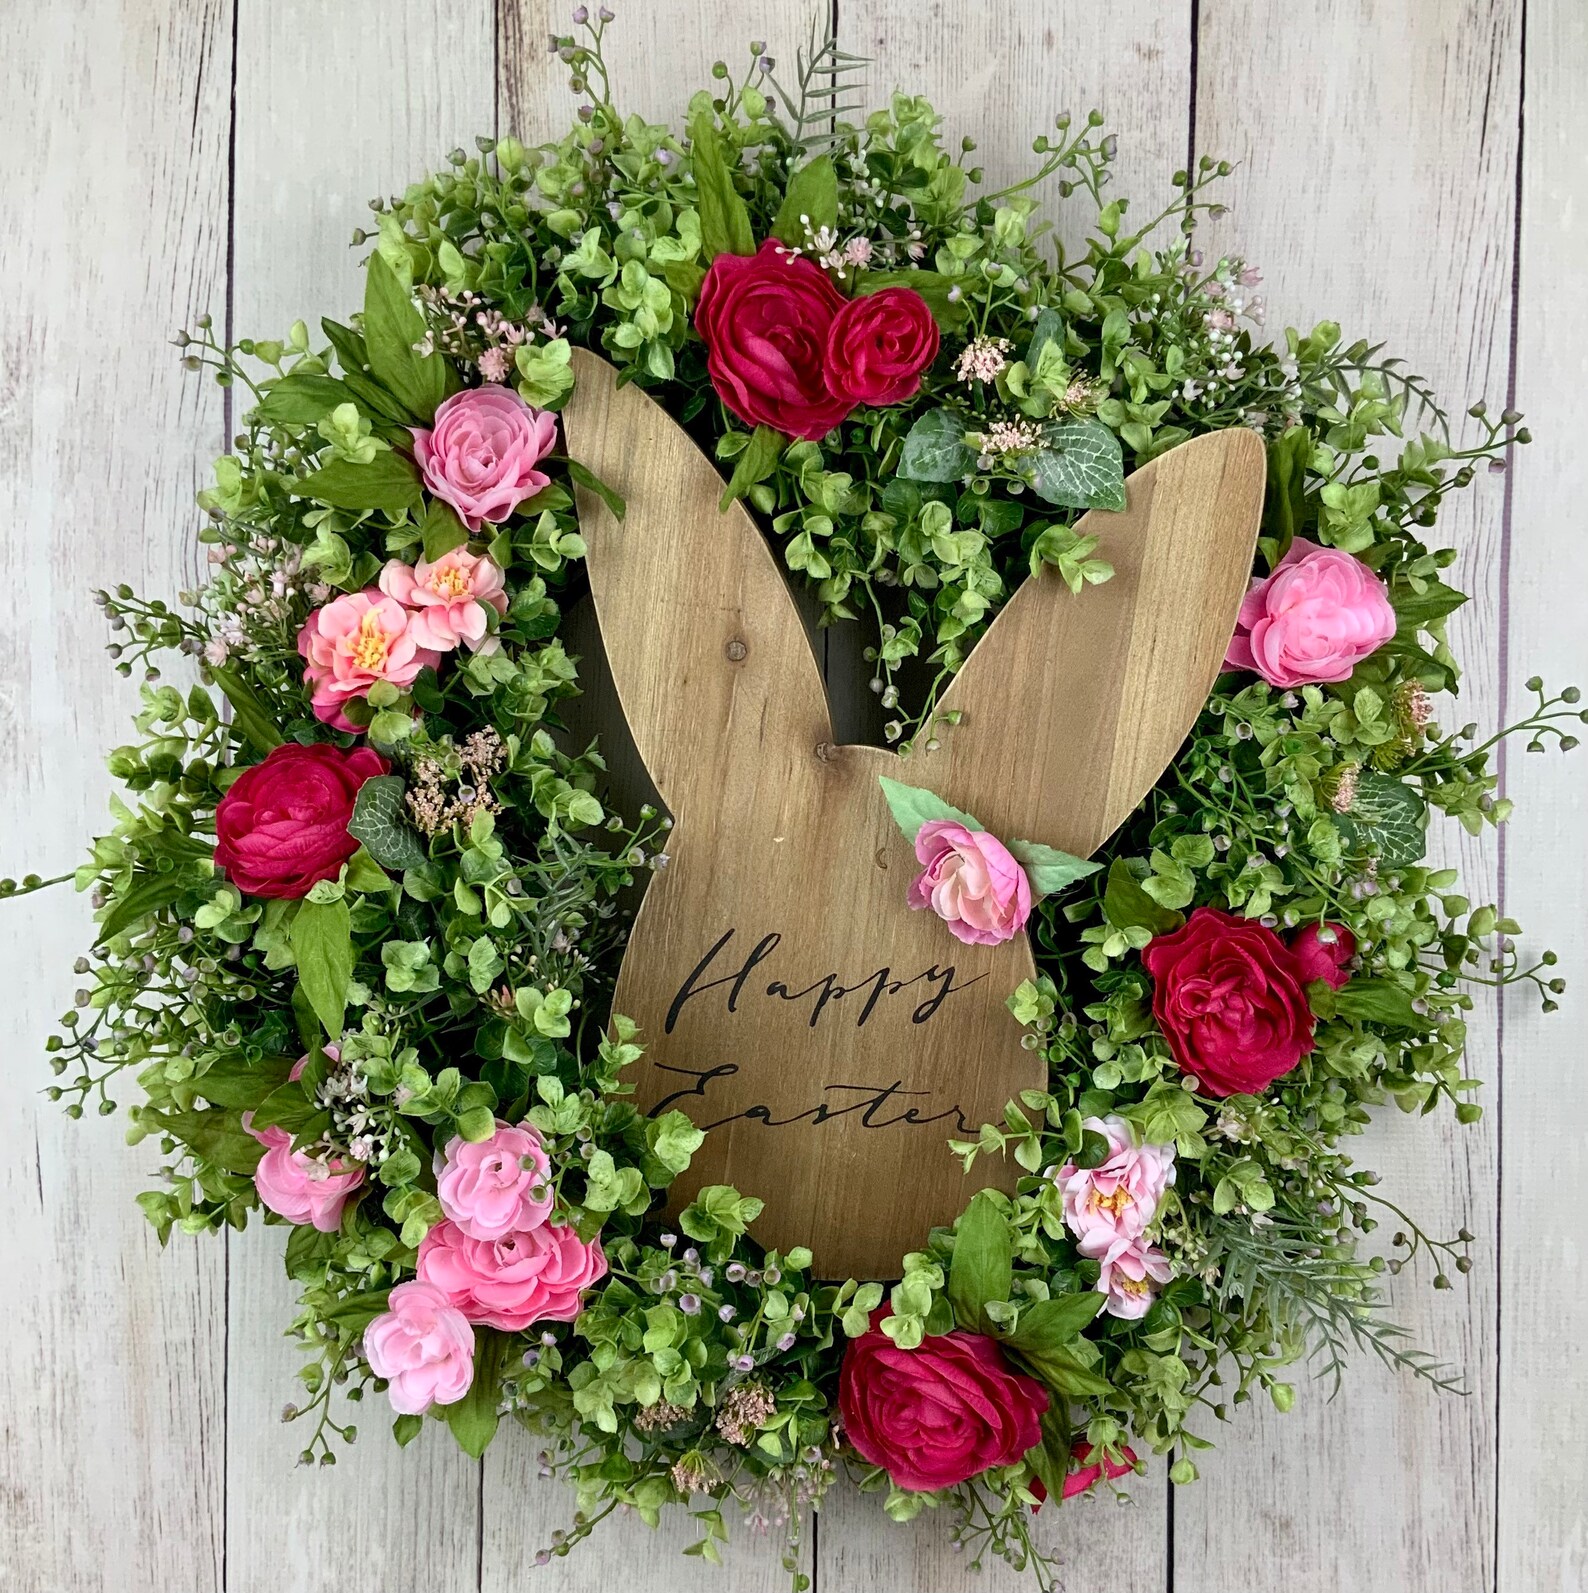 Happy Easter Bunny Greenery Wreaths with Flowers